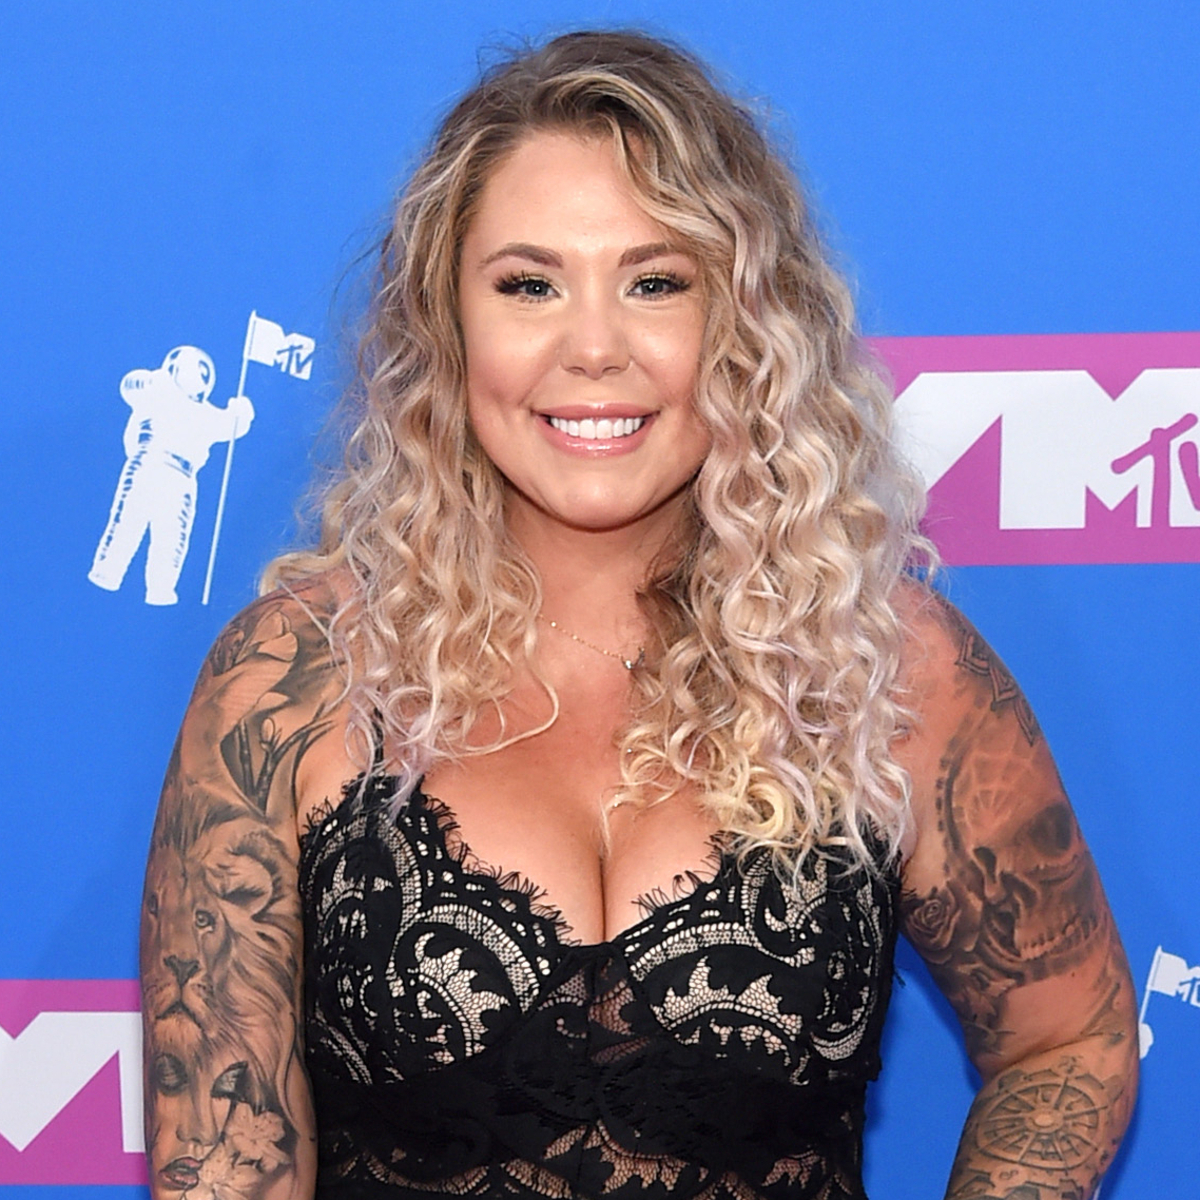 Teen Mom’s Kailyn Lowry Shares First Photo of Her Twins